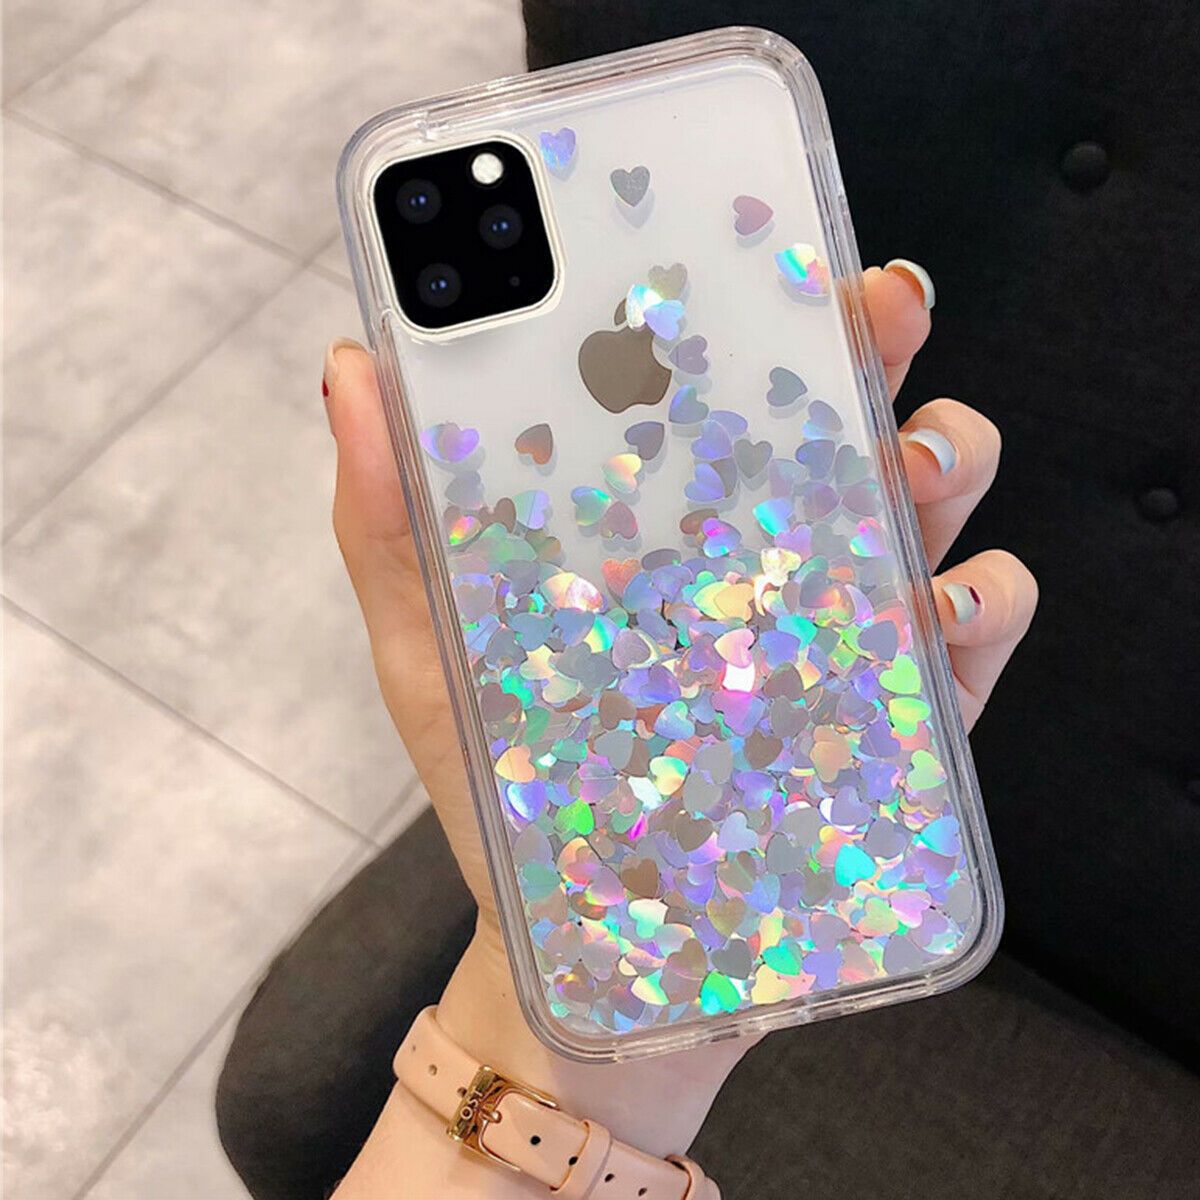 For Iphone 11 Pro Max 8 Plus 7 XS Max XR Cute Bling Glitter Girls Women Case Cover casedeal2000 